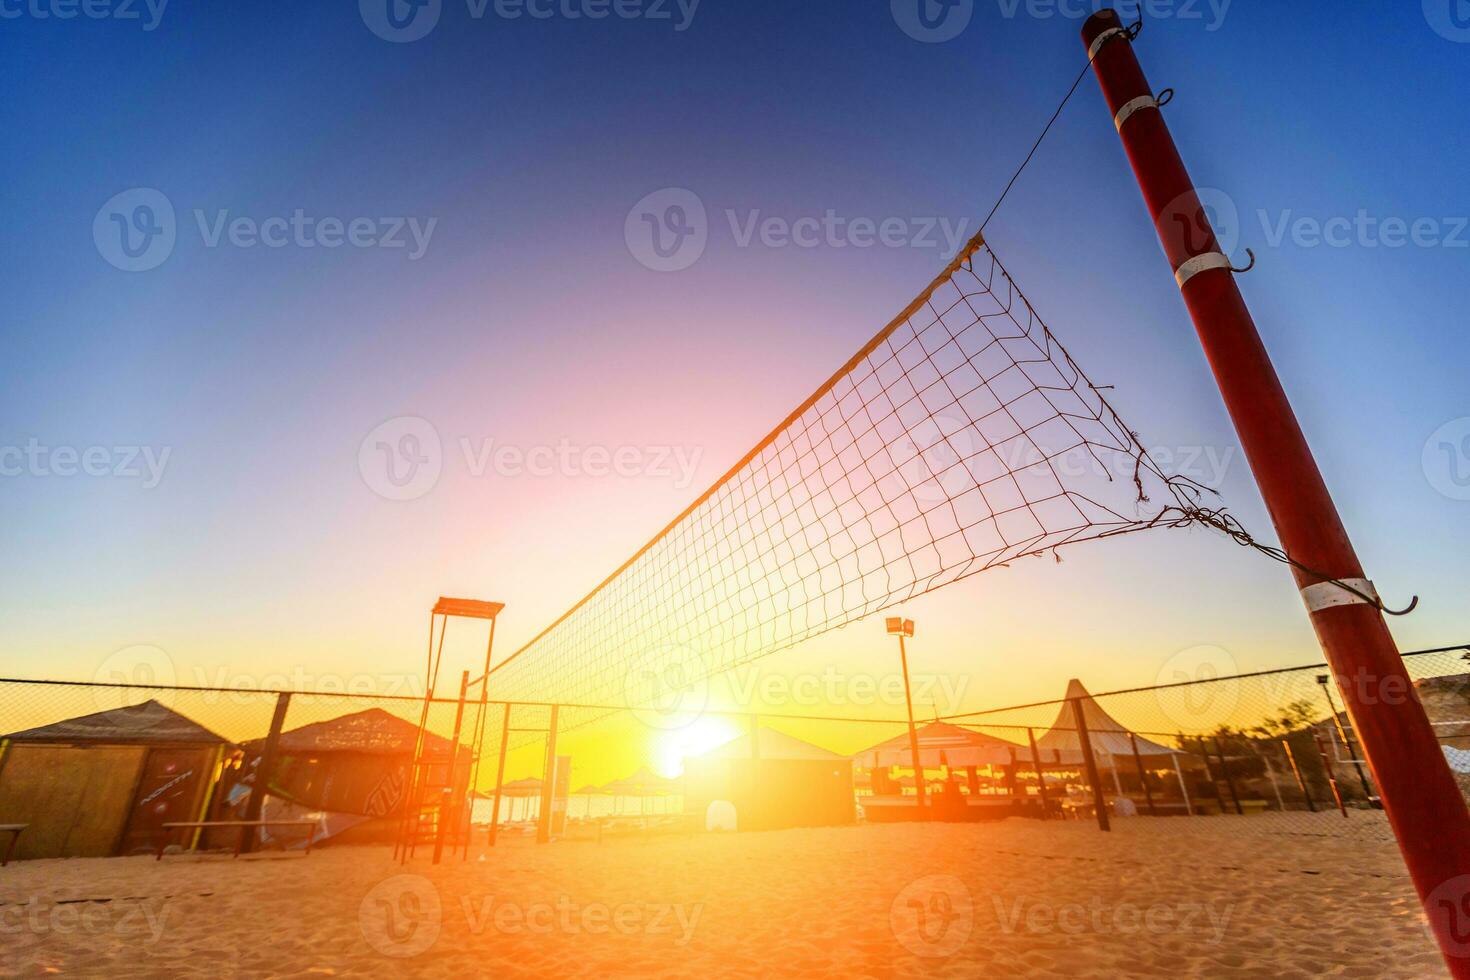 Sillhouette of a volleyball net and sunrise on the beach photo